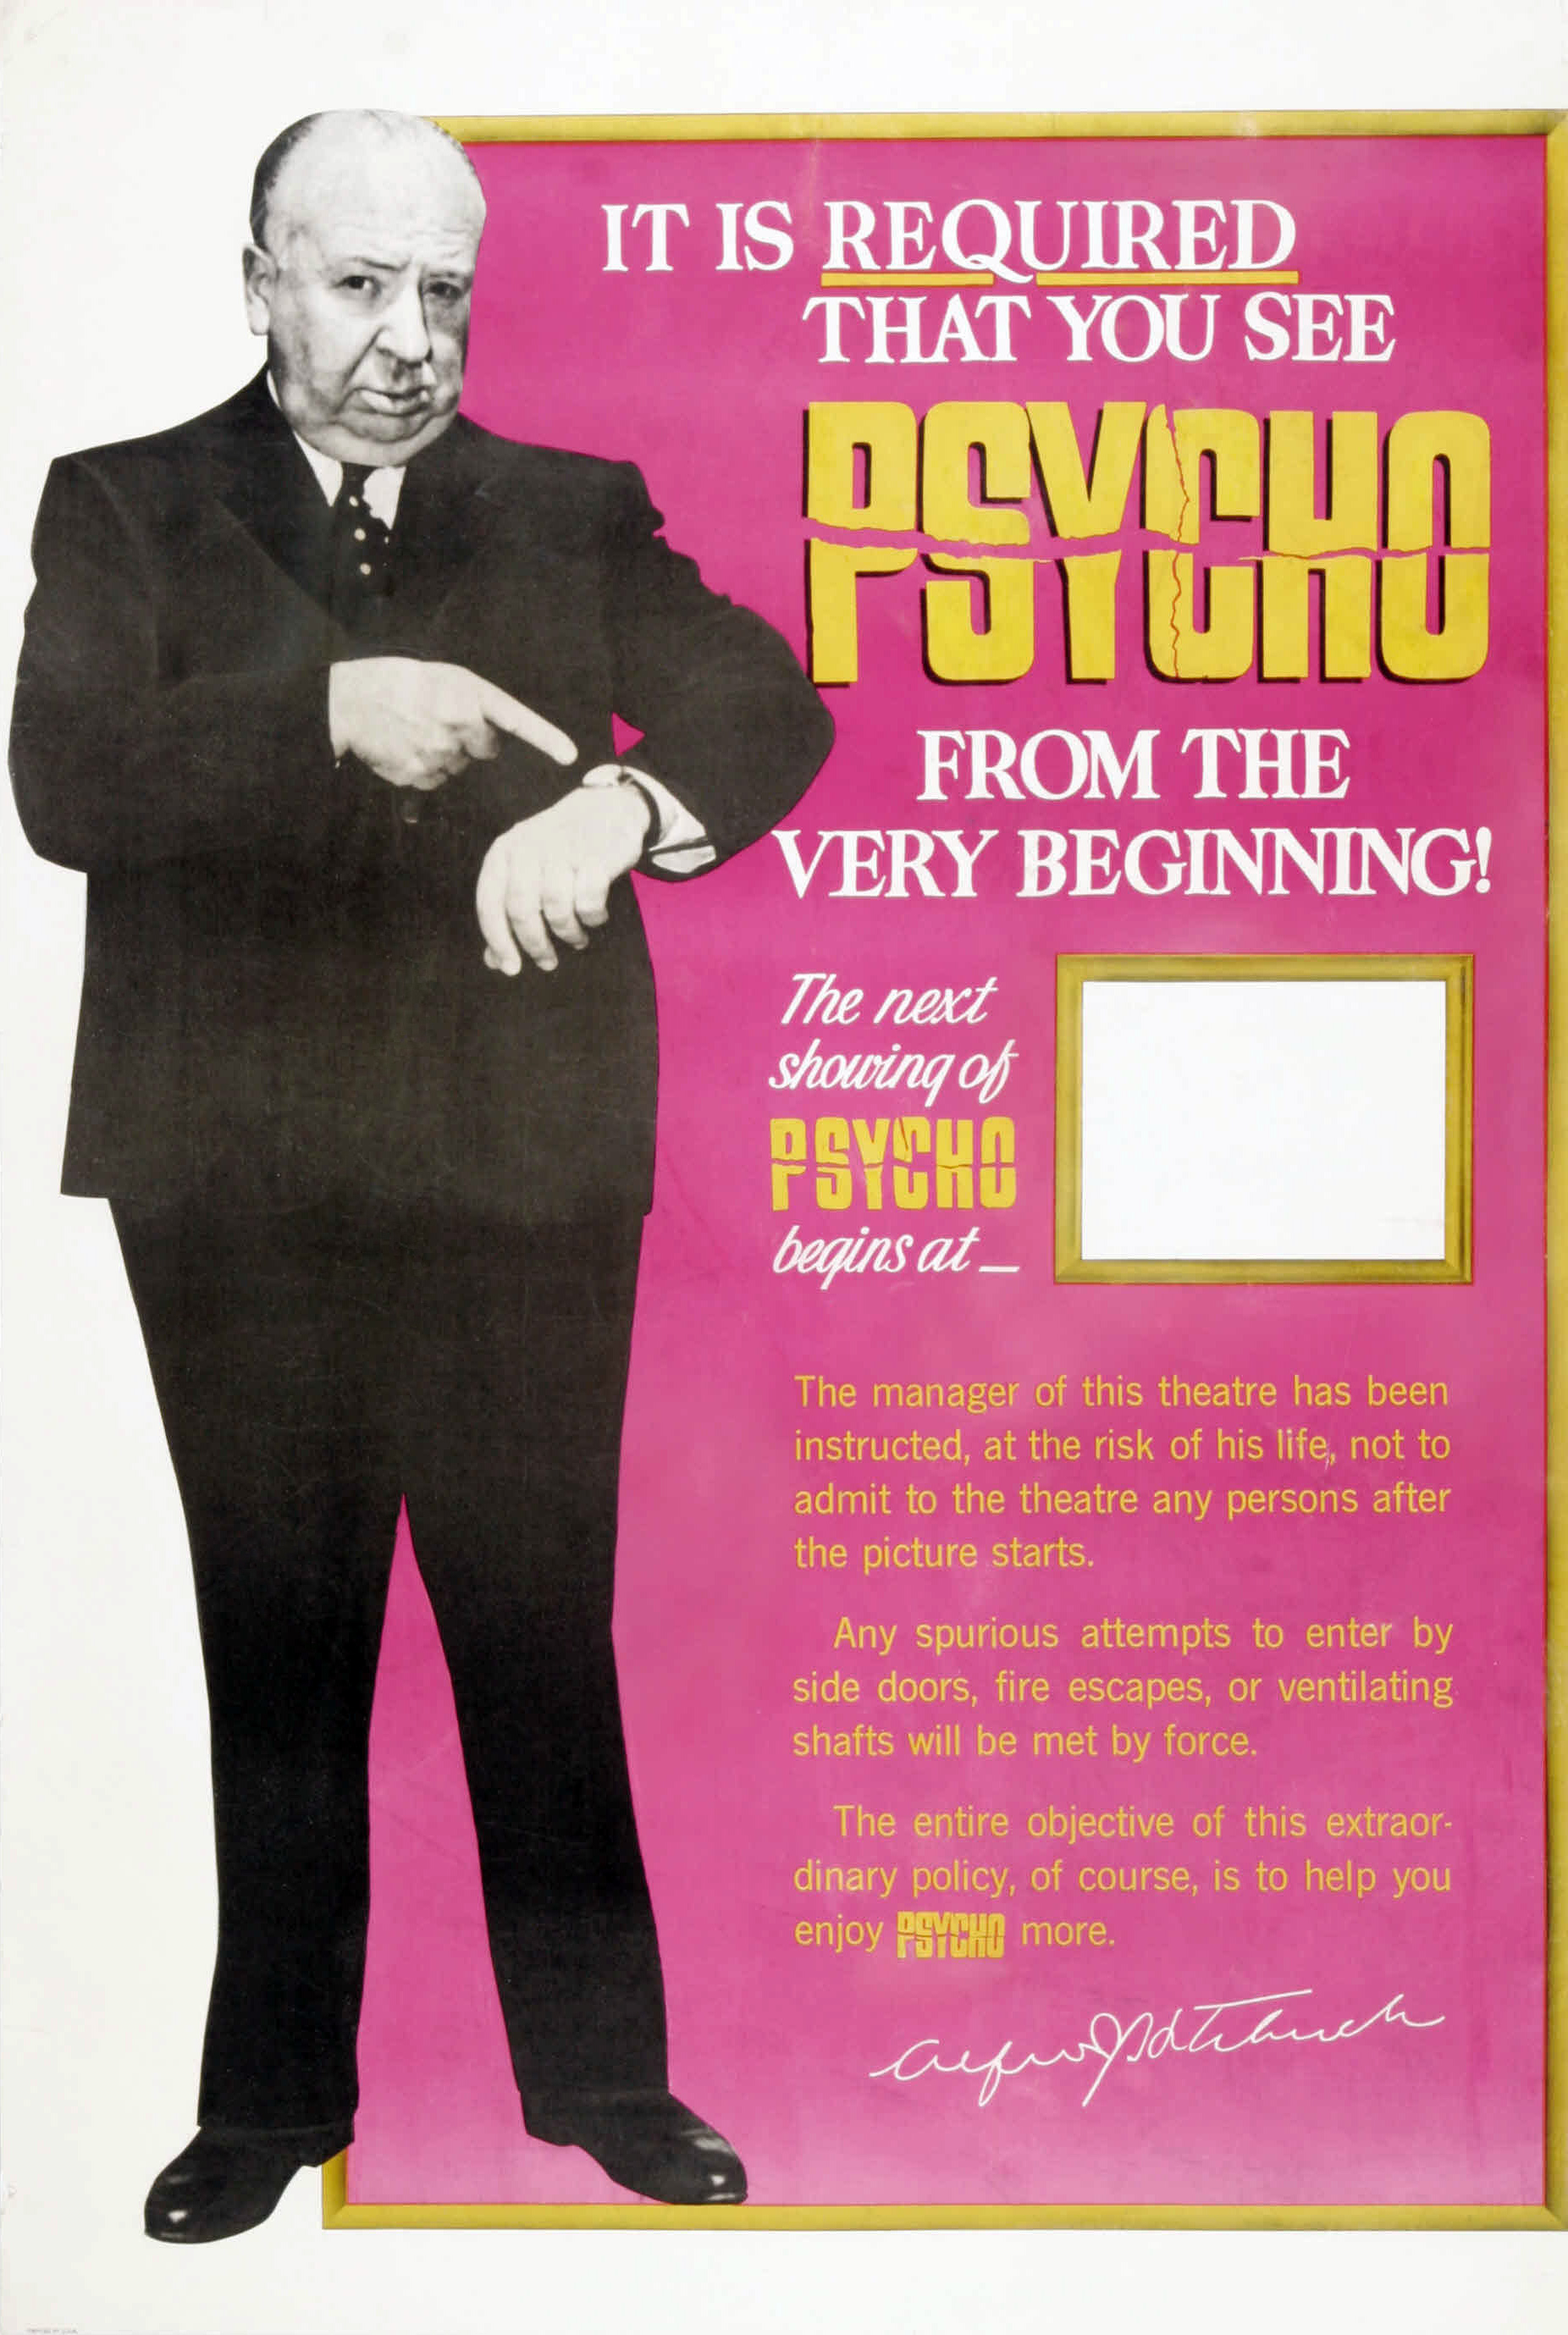 Alfred Hitchcock stands next to text promoting the film &quot;Psycho,&quot; emphasizing the importance of starting from the beginning